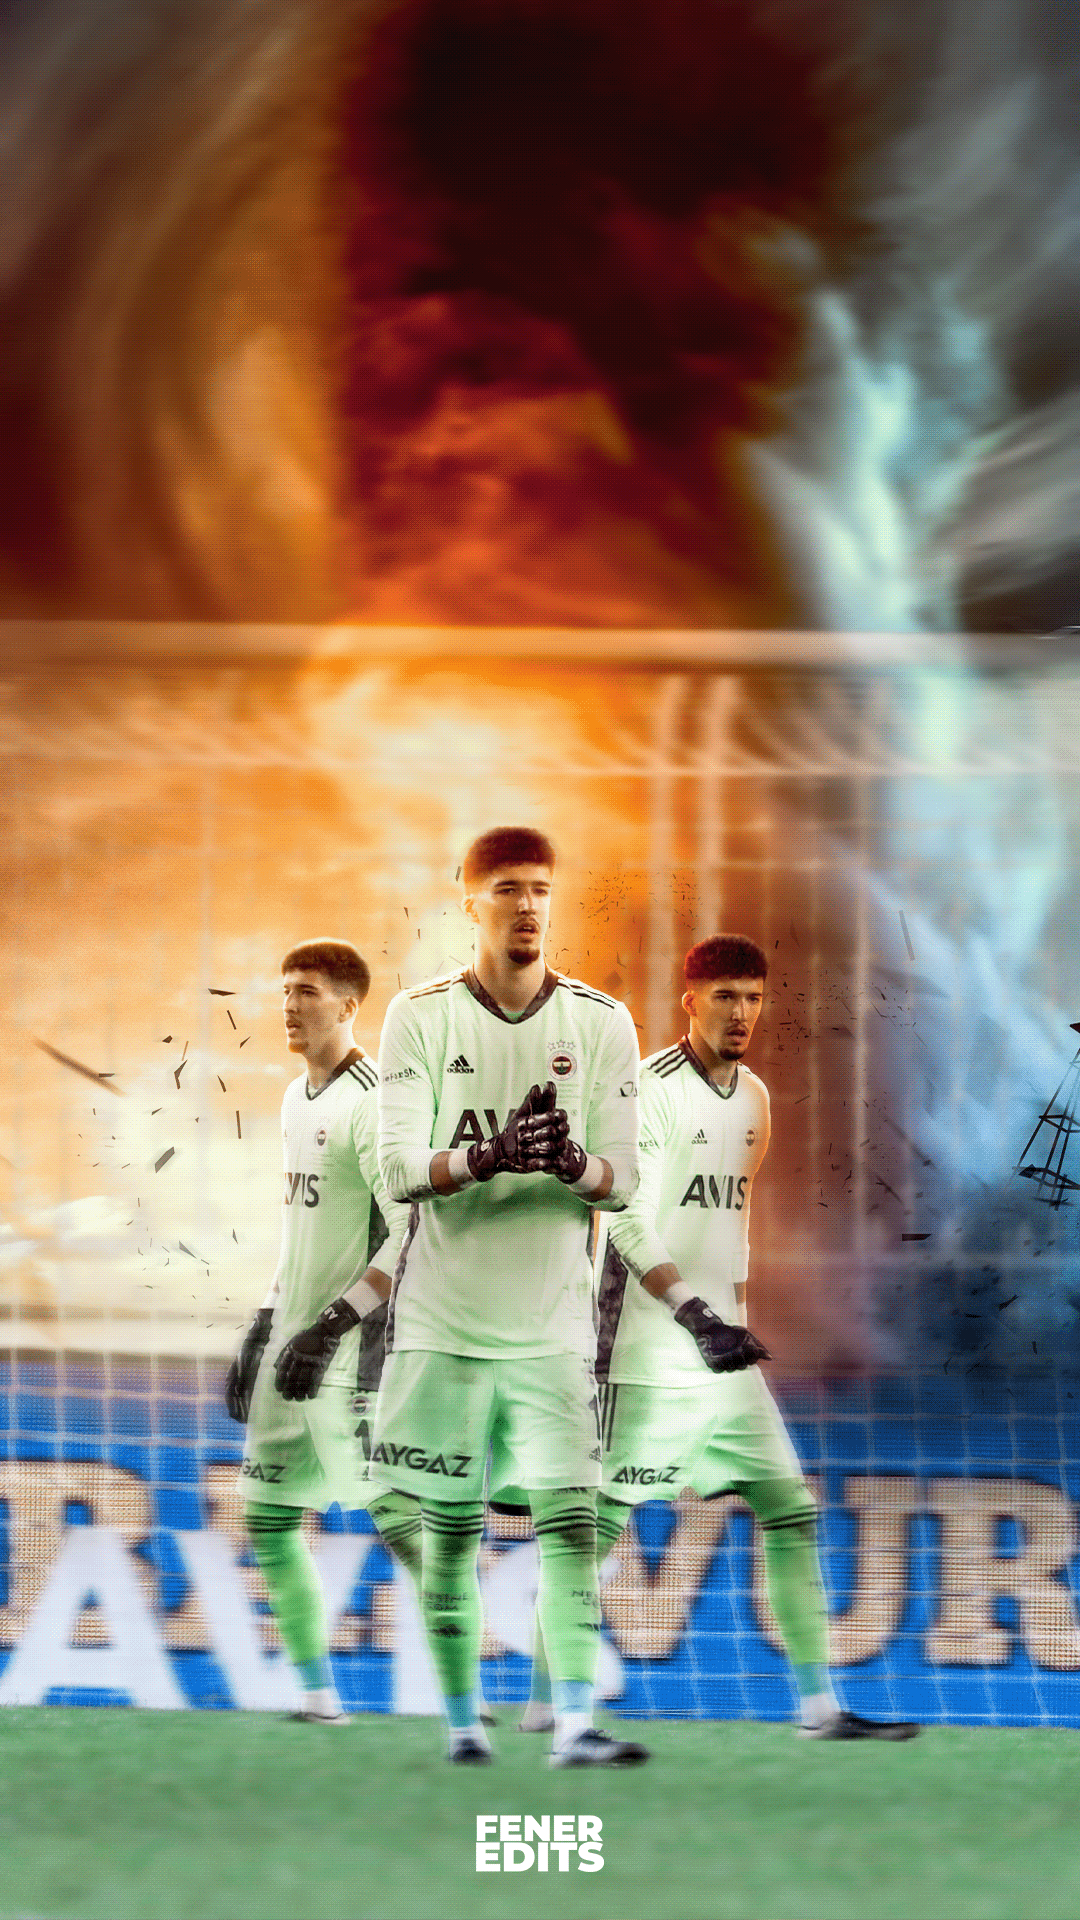 Altay Wallpapers